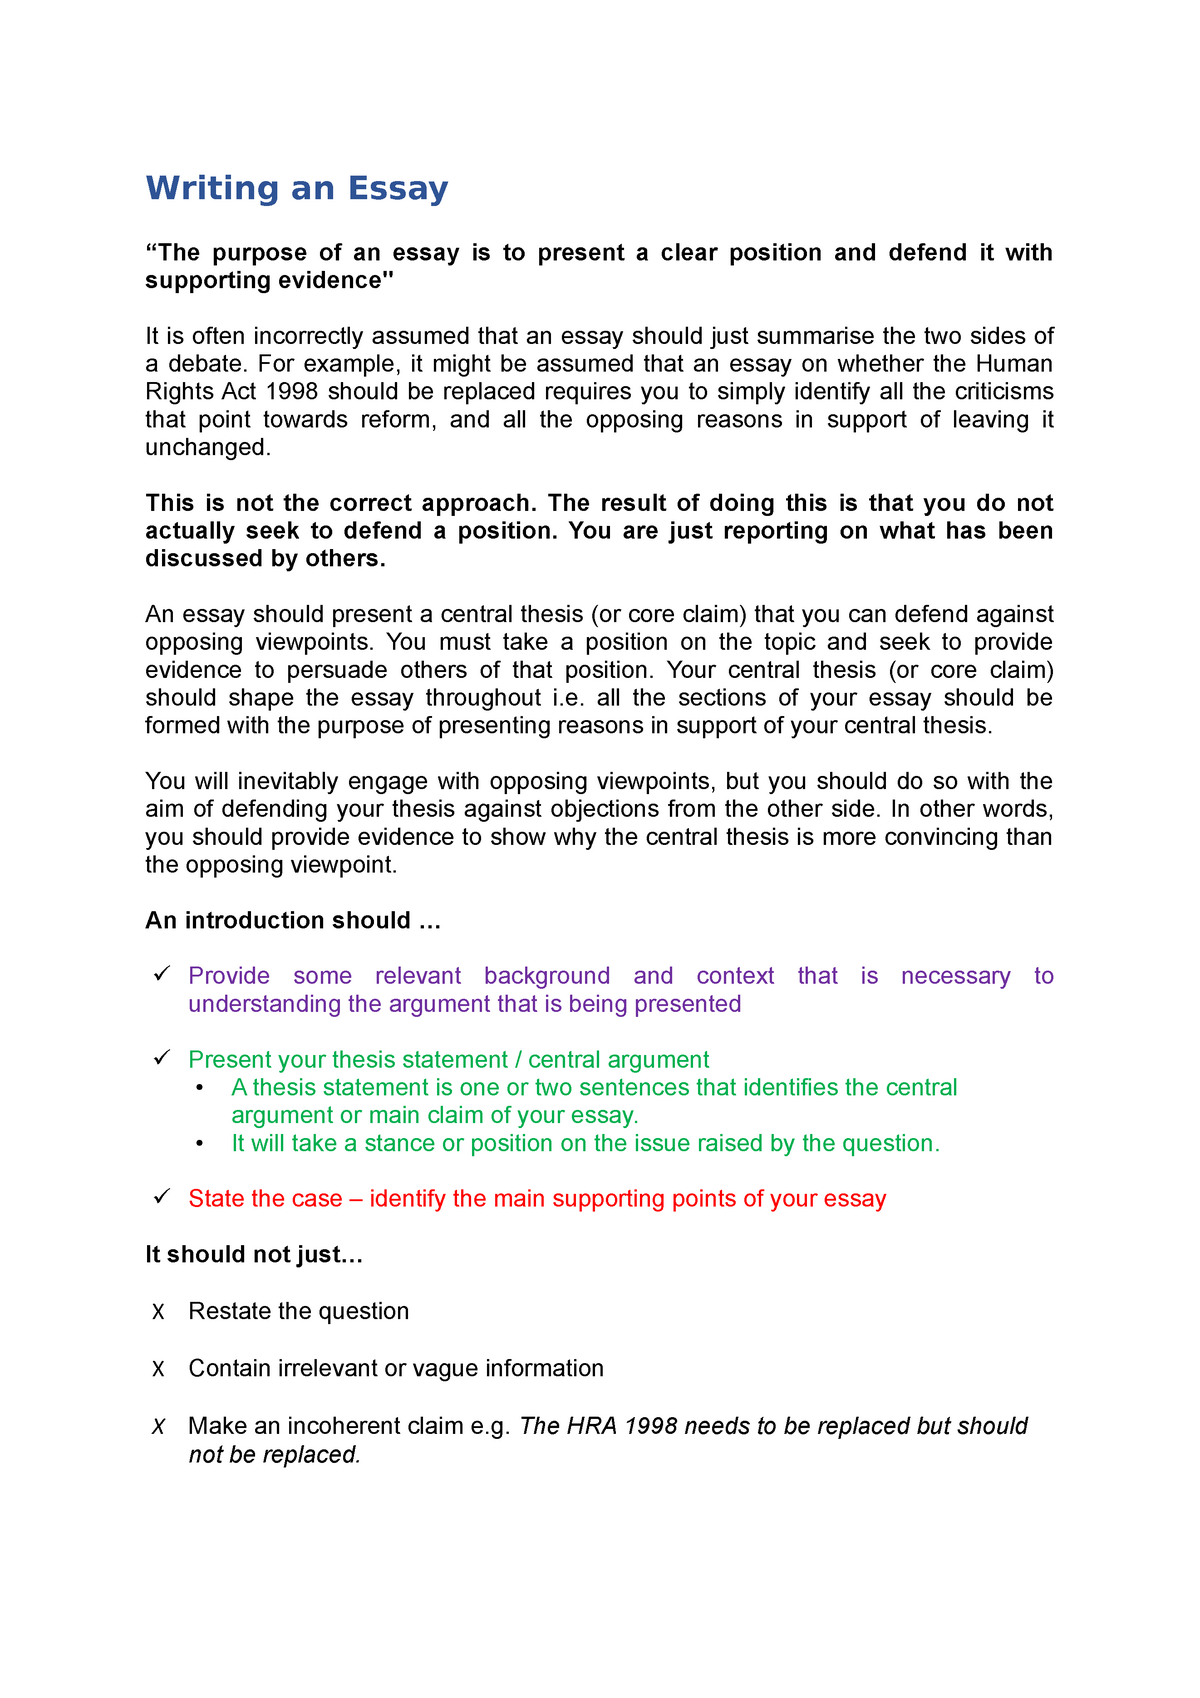 Writing an essay - Writing an Essay “The purpose of an essay is to ...